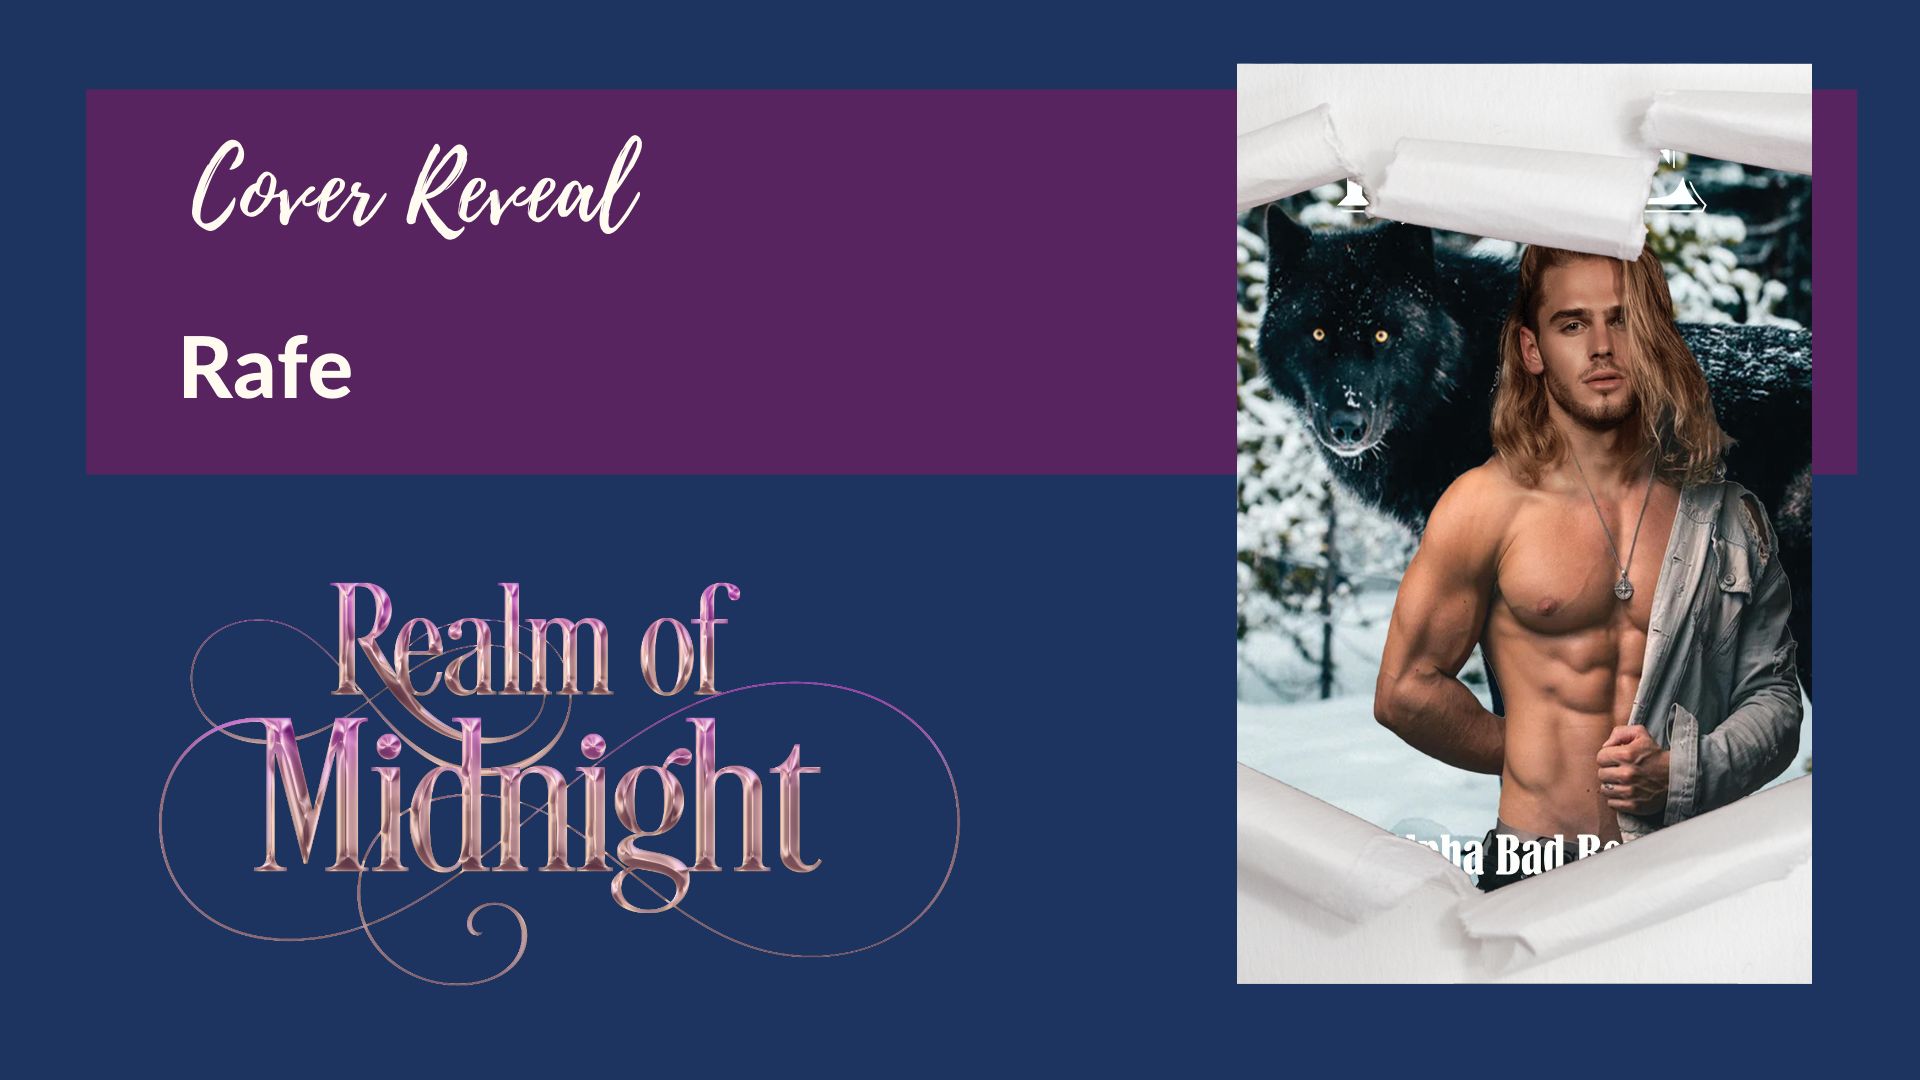 You are currently viewing Cover Reveal: Rafe by Crystal Dawn